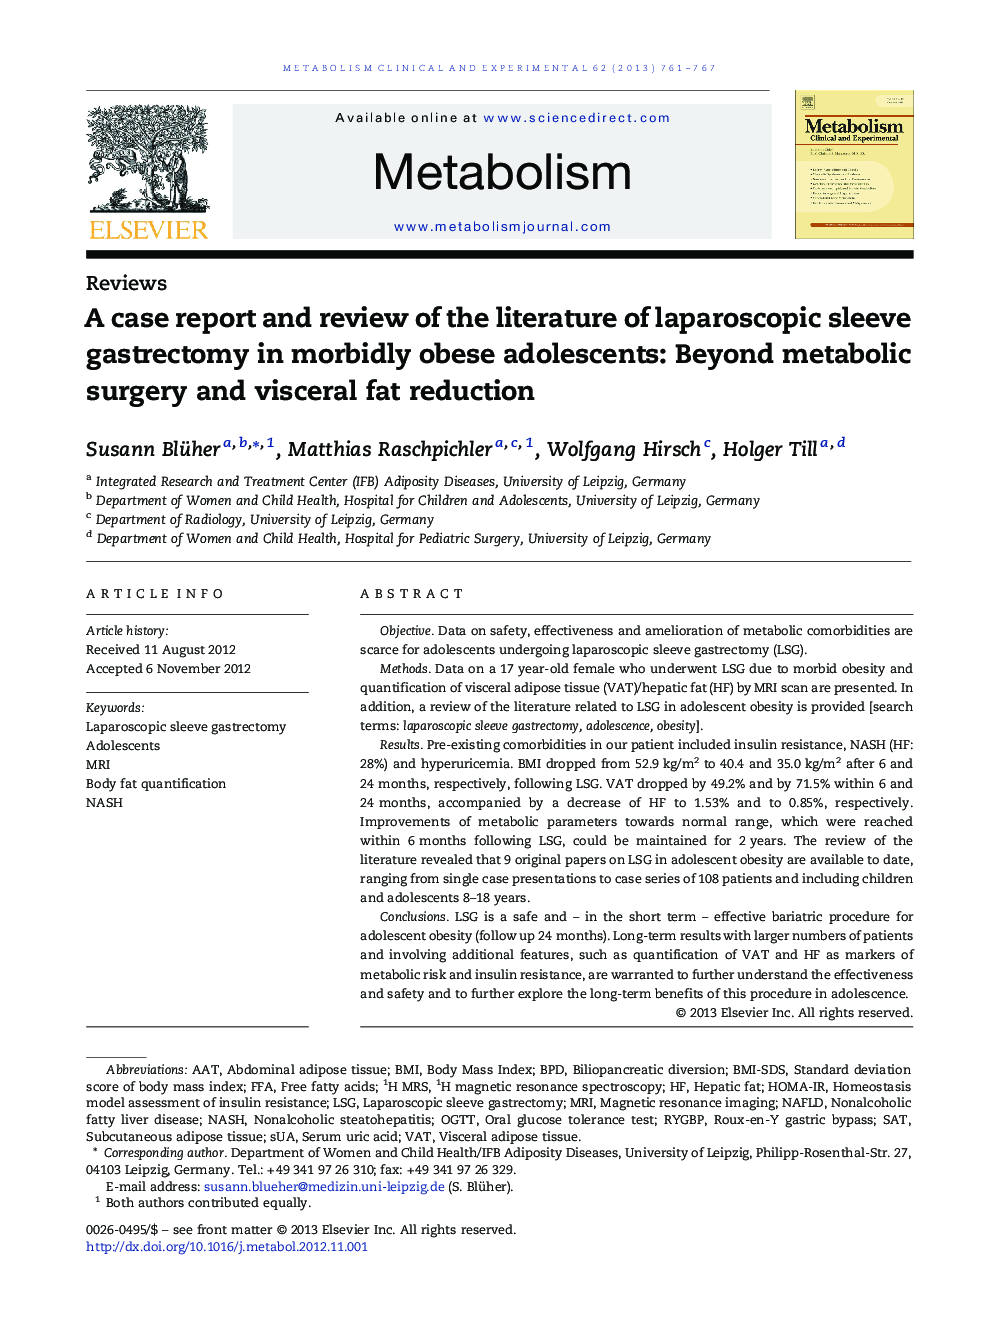 A case report and review of the literature of laparoscopic sleeve gastrectomy in morbidly obese adolescents: Beyond metabolic surgery and visceral fat reduction